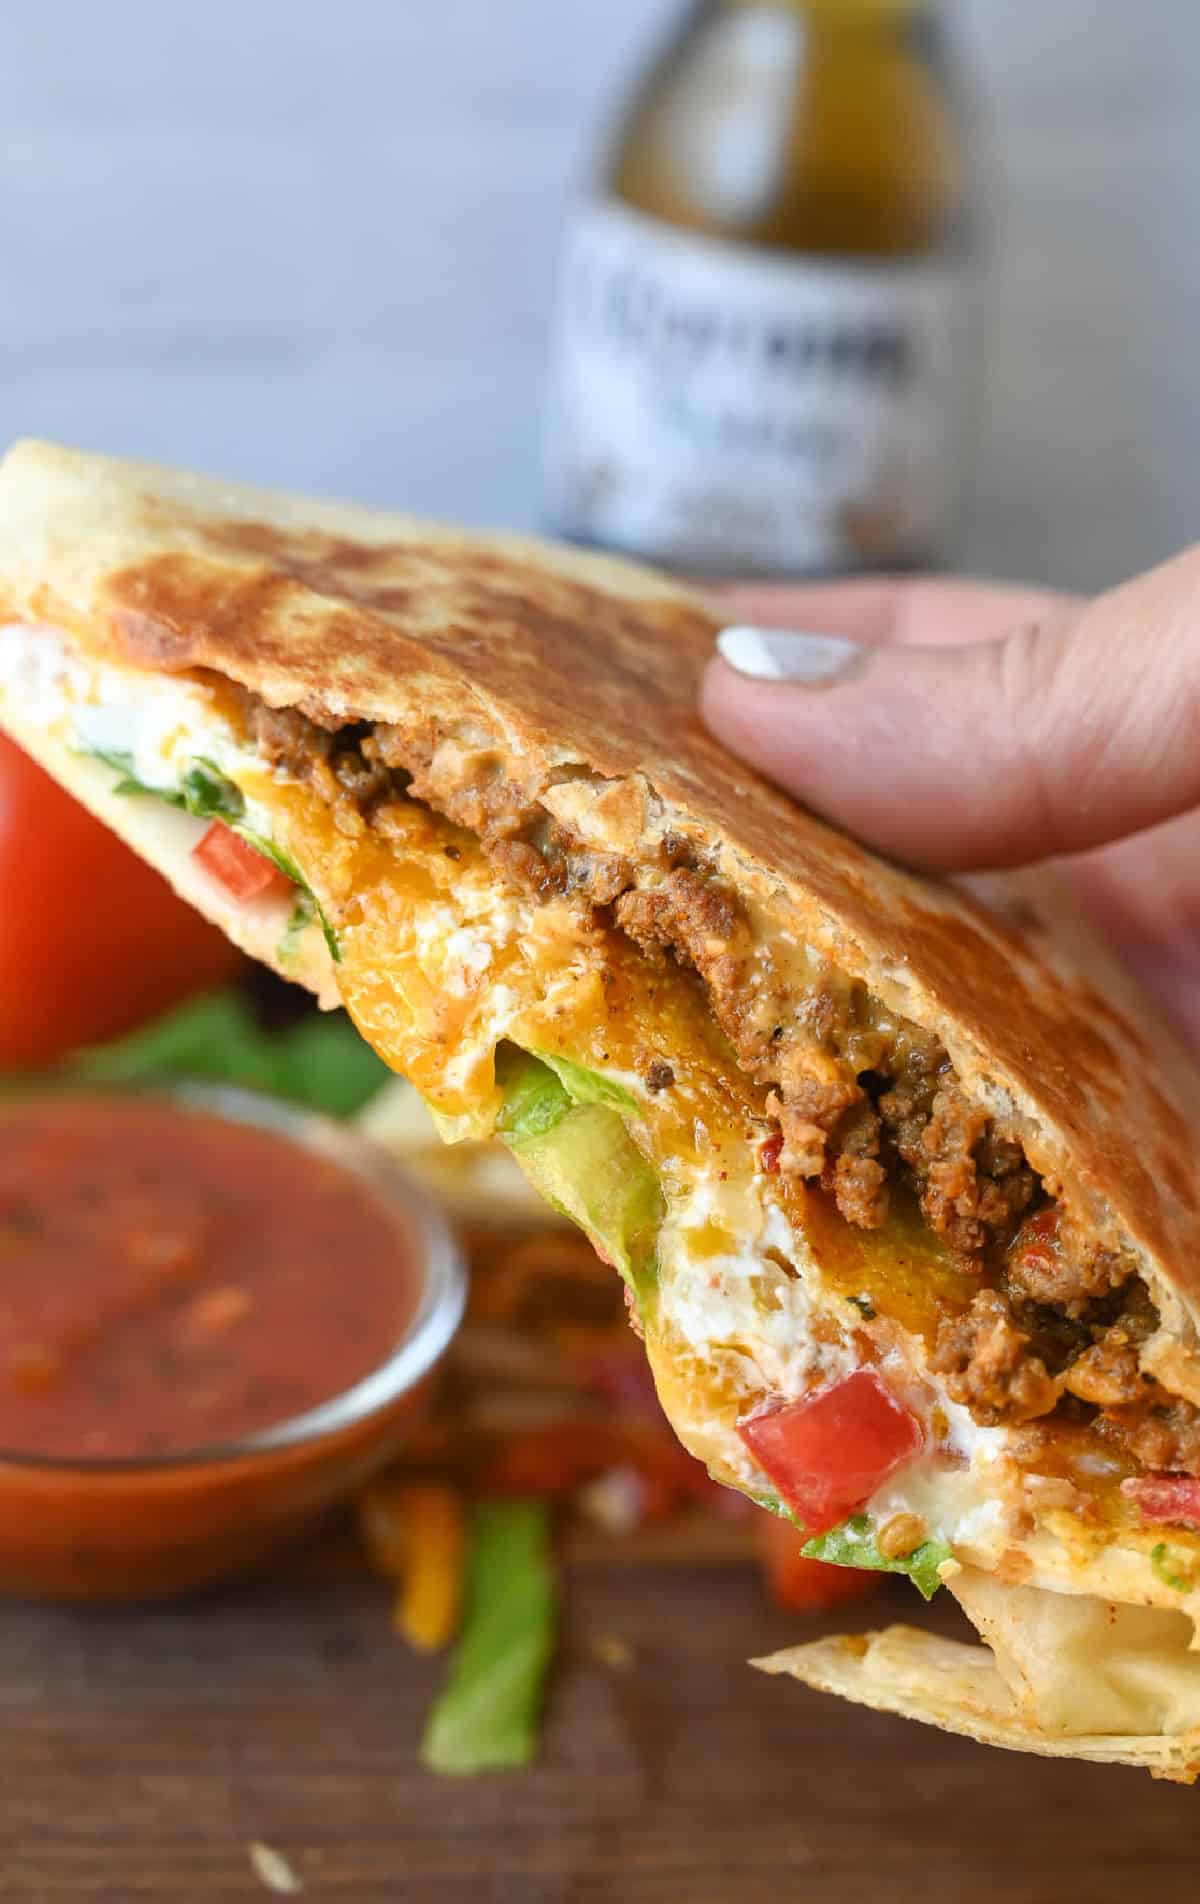 A crunch wrap being held.